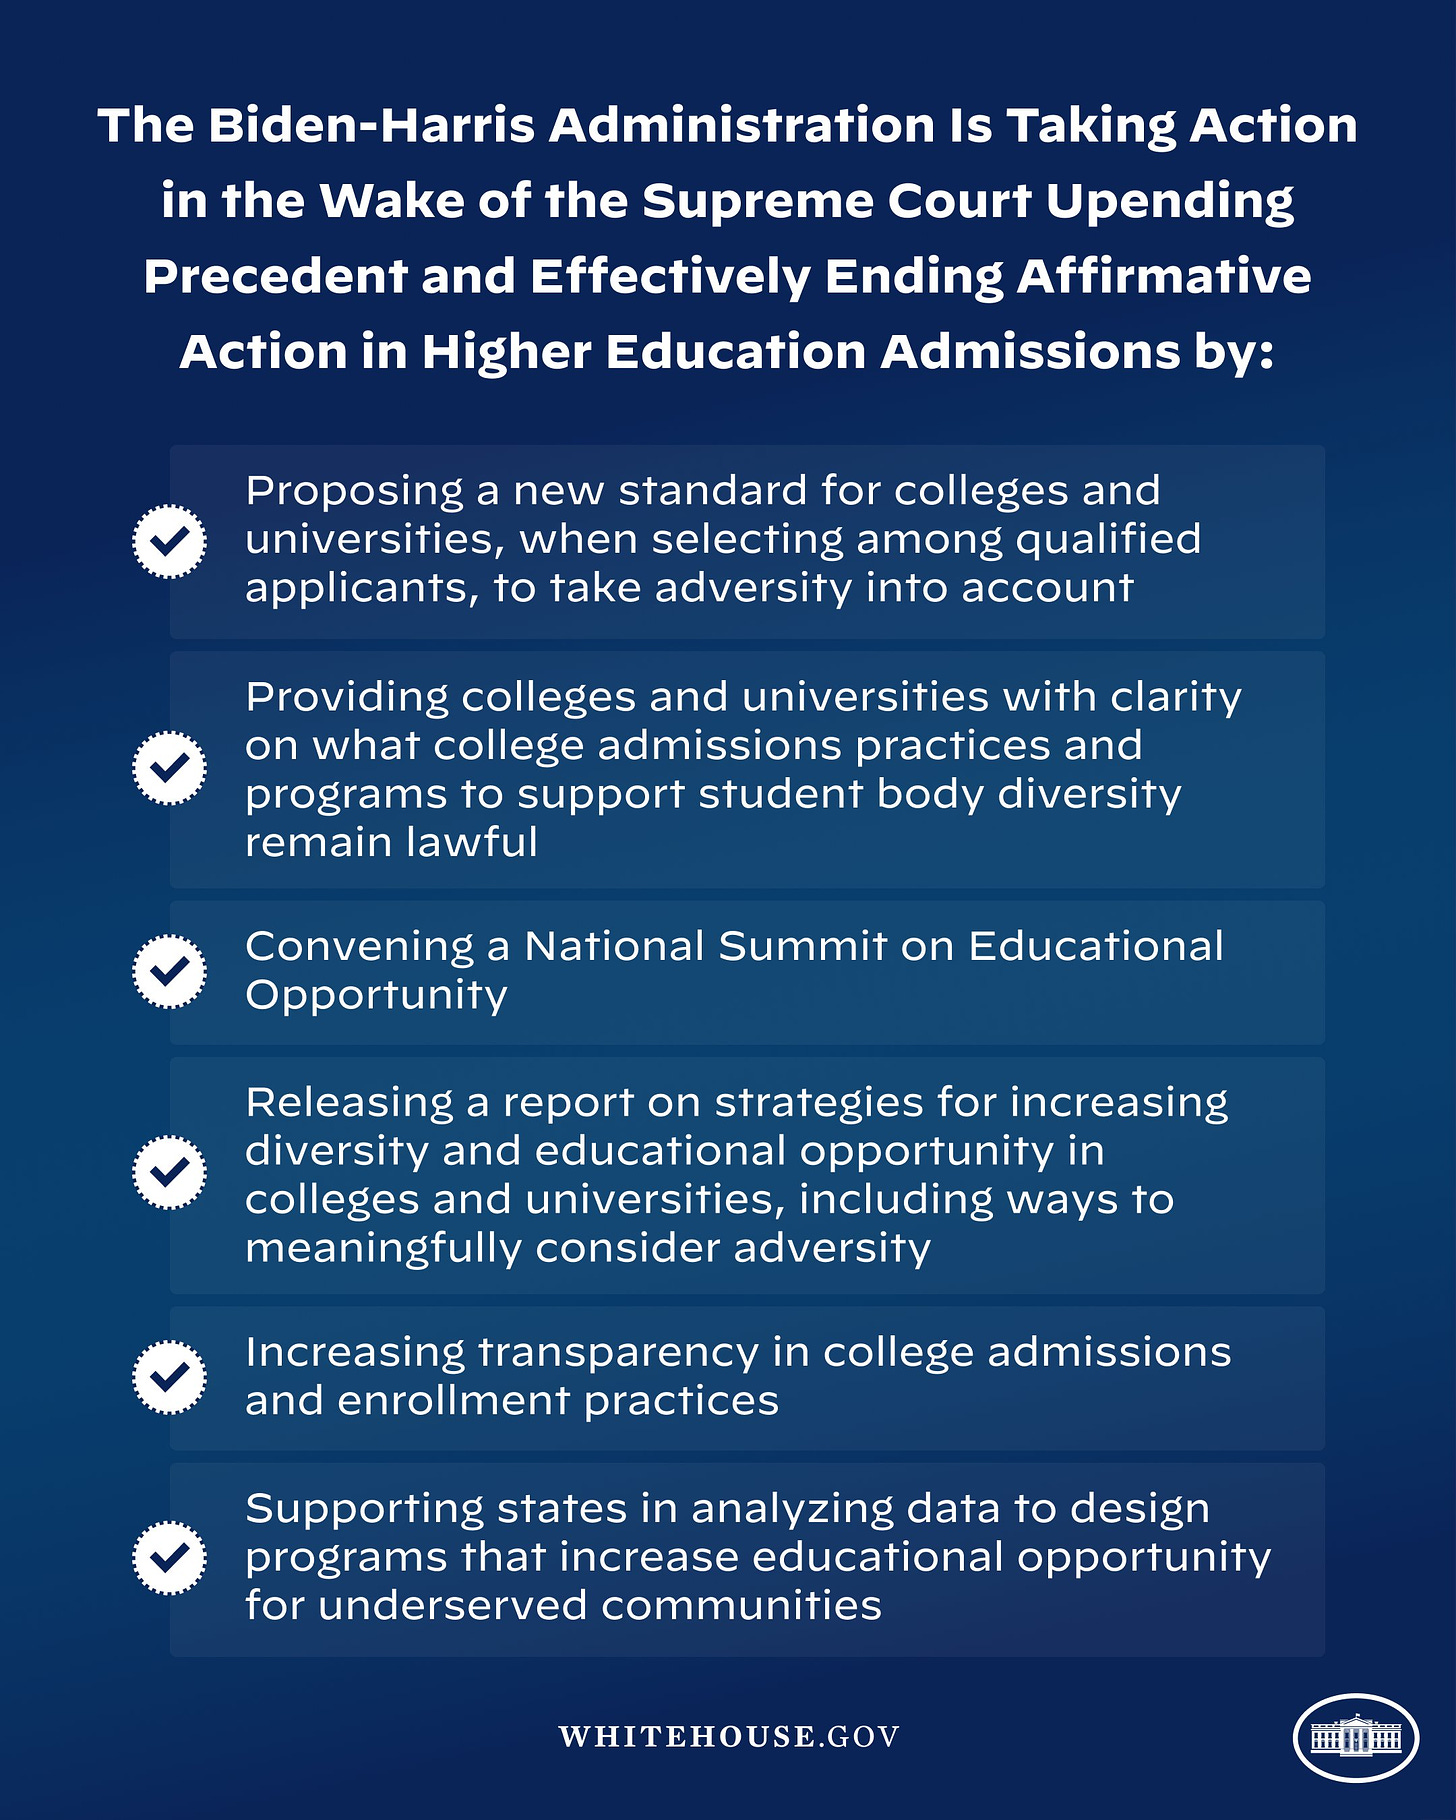 The Biden-Harris Administration is Taking Action In the Wake of the Supreme Court Upending Precedent and Effectively Ending Affirmative Action in Higher Education Admissions by"
- Proposing a new standard for colleges and universities, when selecting among qualified applicants, to take adversity into account
- Providing colleges and universities with clarity on what college admissions practices and programs to support student body diversity remain lawful
- Convening a National Summit on Educational Opportunity 
- Releasing a report on strategies for increasing diversity and educational opportunity in colleges and universities, including ways to meaningfully consider adversity 
- Increasing transparency in college admissions and enrollment practices 
- Supporting states in analyzing data to design programs that increase educational opportunity for underserved communities 